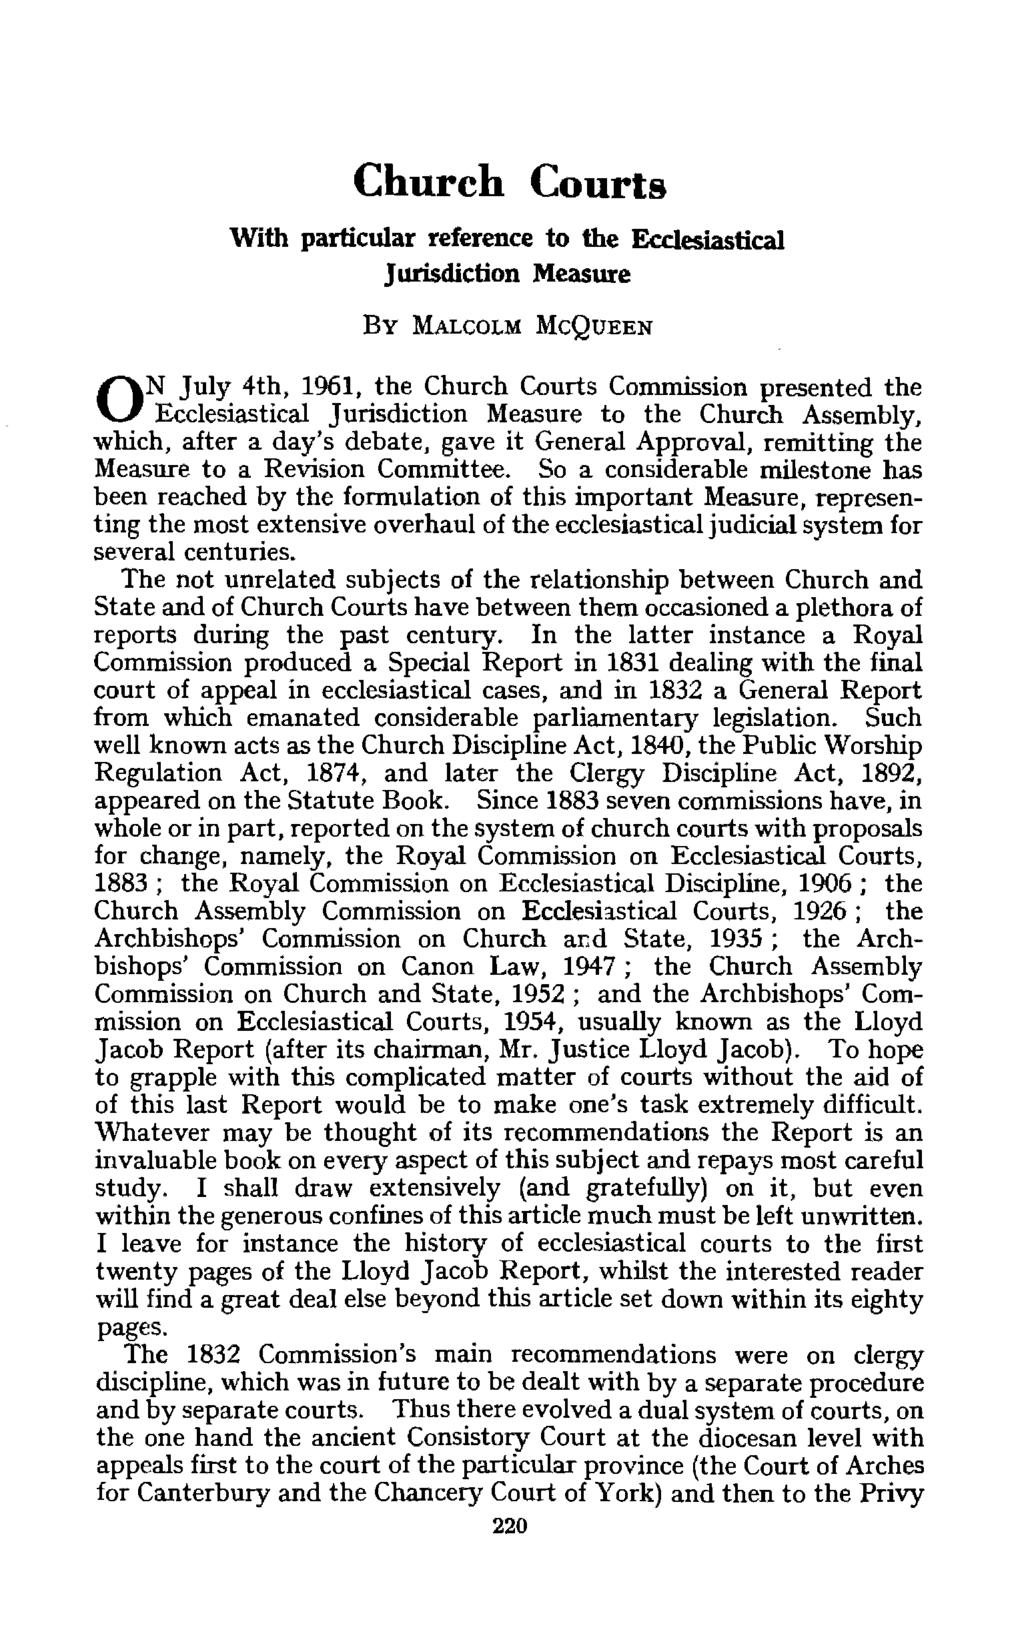 Church Courts With particular reference to the Ecclesiastical Jurisdiction Measure BY MALCOLM McQUEEN N July 4th, 1961, the Church Courts Commission presented the O Ecclesiastical Jurisdiction